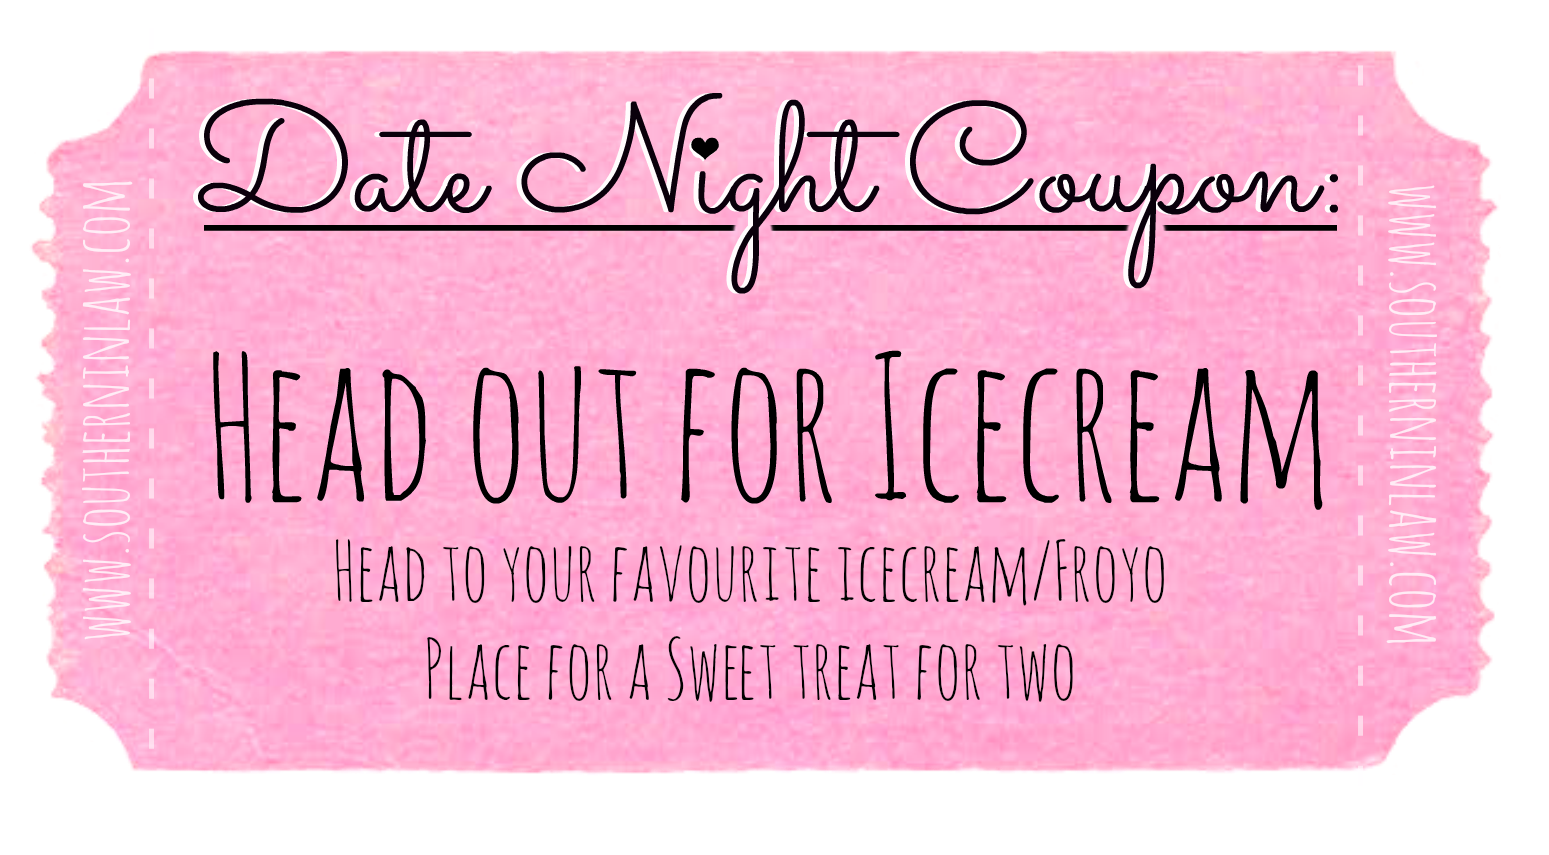 Affordable Date Ideas - Date Night Coupons - Head out for Icecream